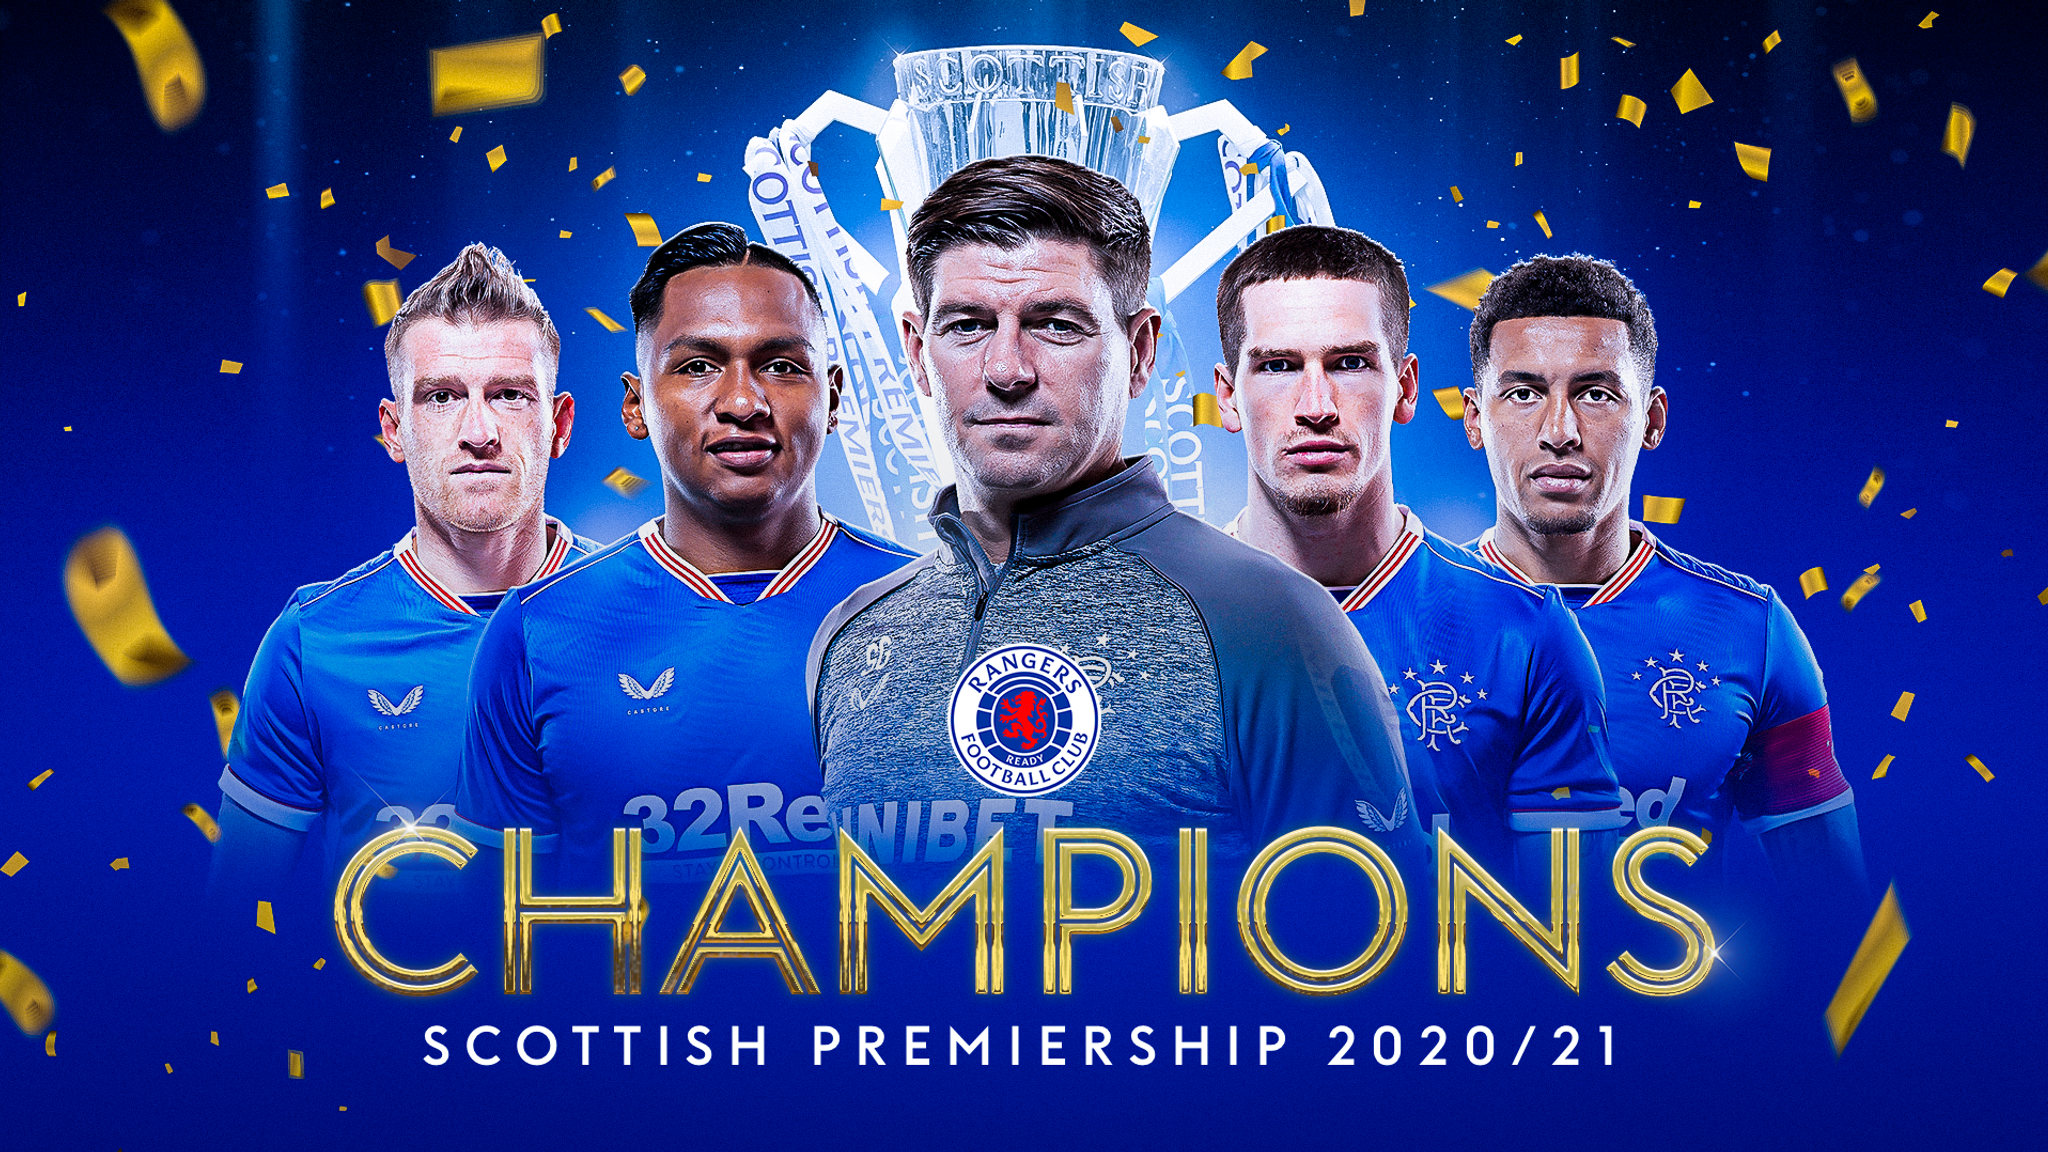 Rangers Confirmed As Scottish Premiership Champions After Celtic Draw With Dundee United Football News Sky Sports